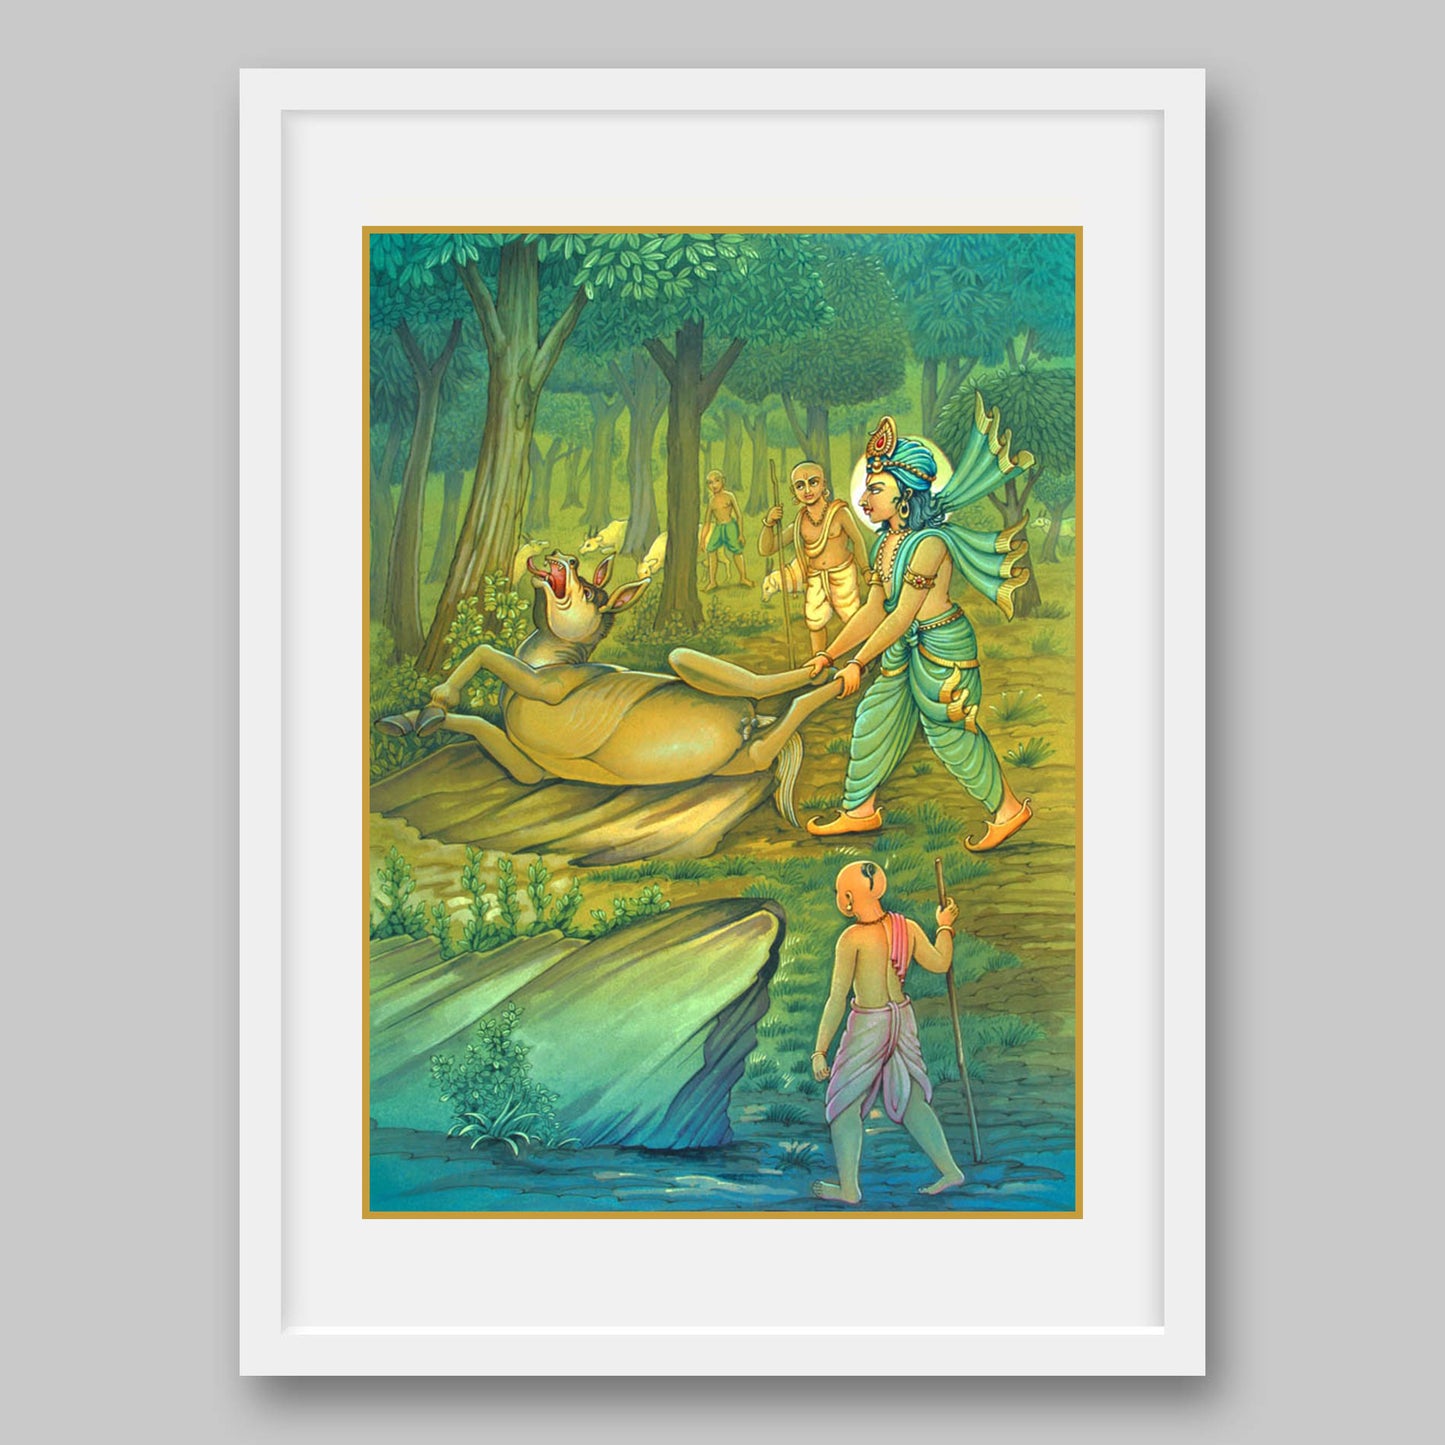 Balaram and Cow Demon – High Quality Print of Artwork by Pieter Weltevrede